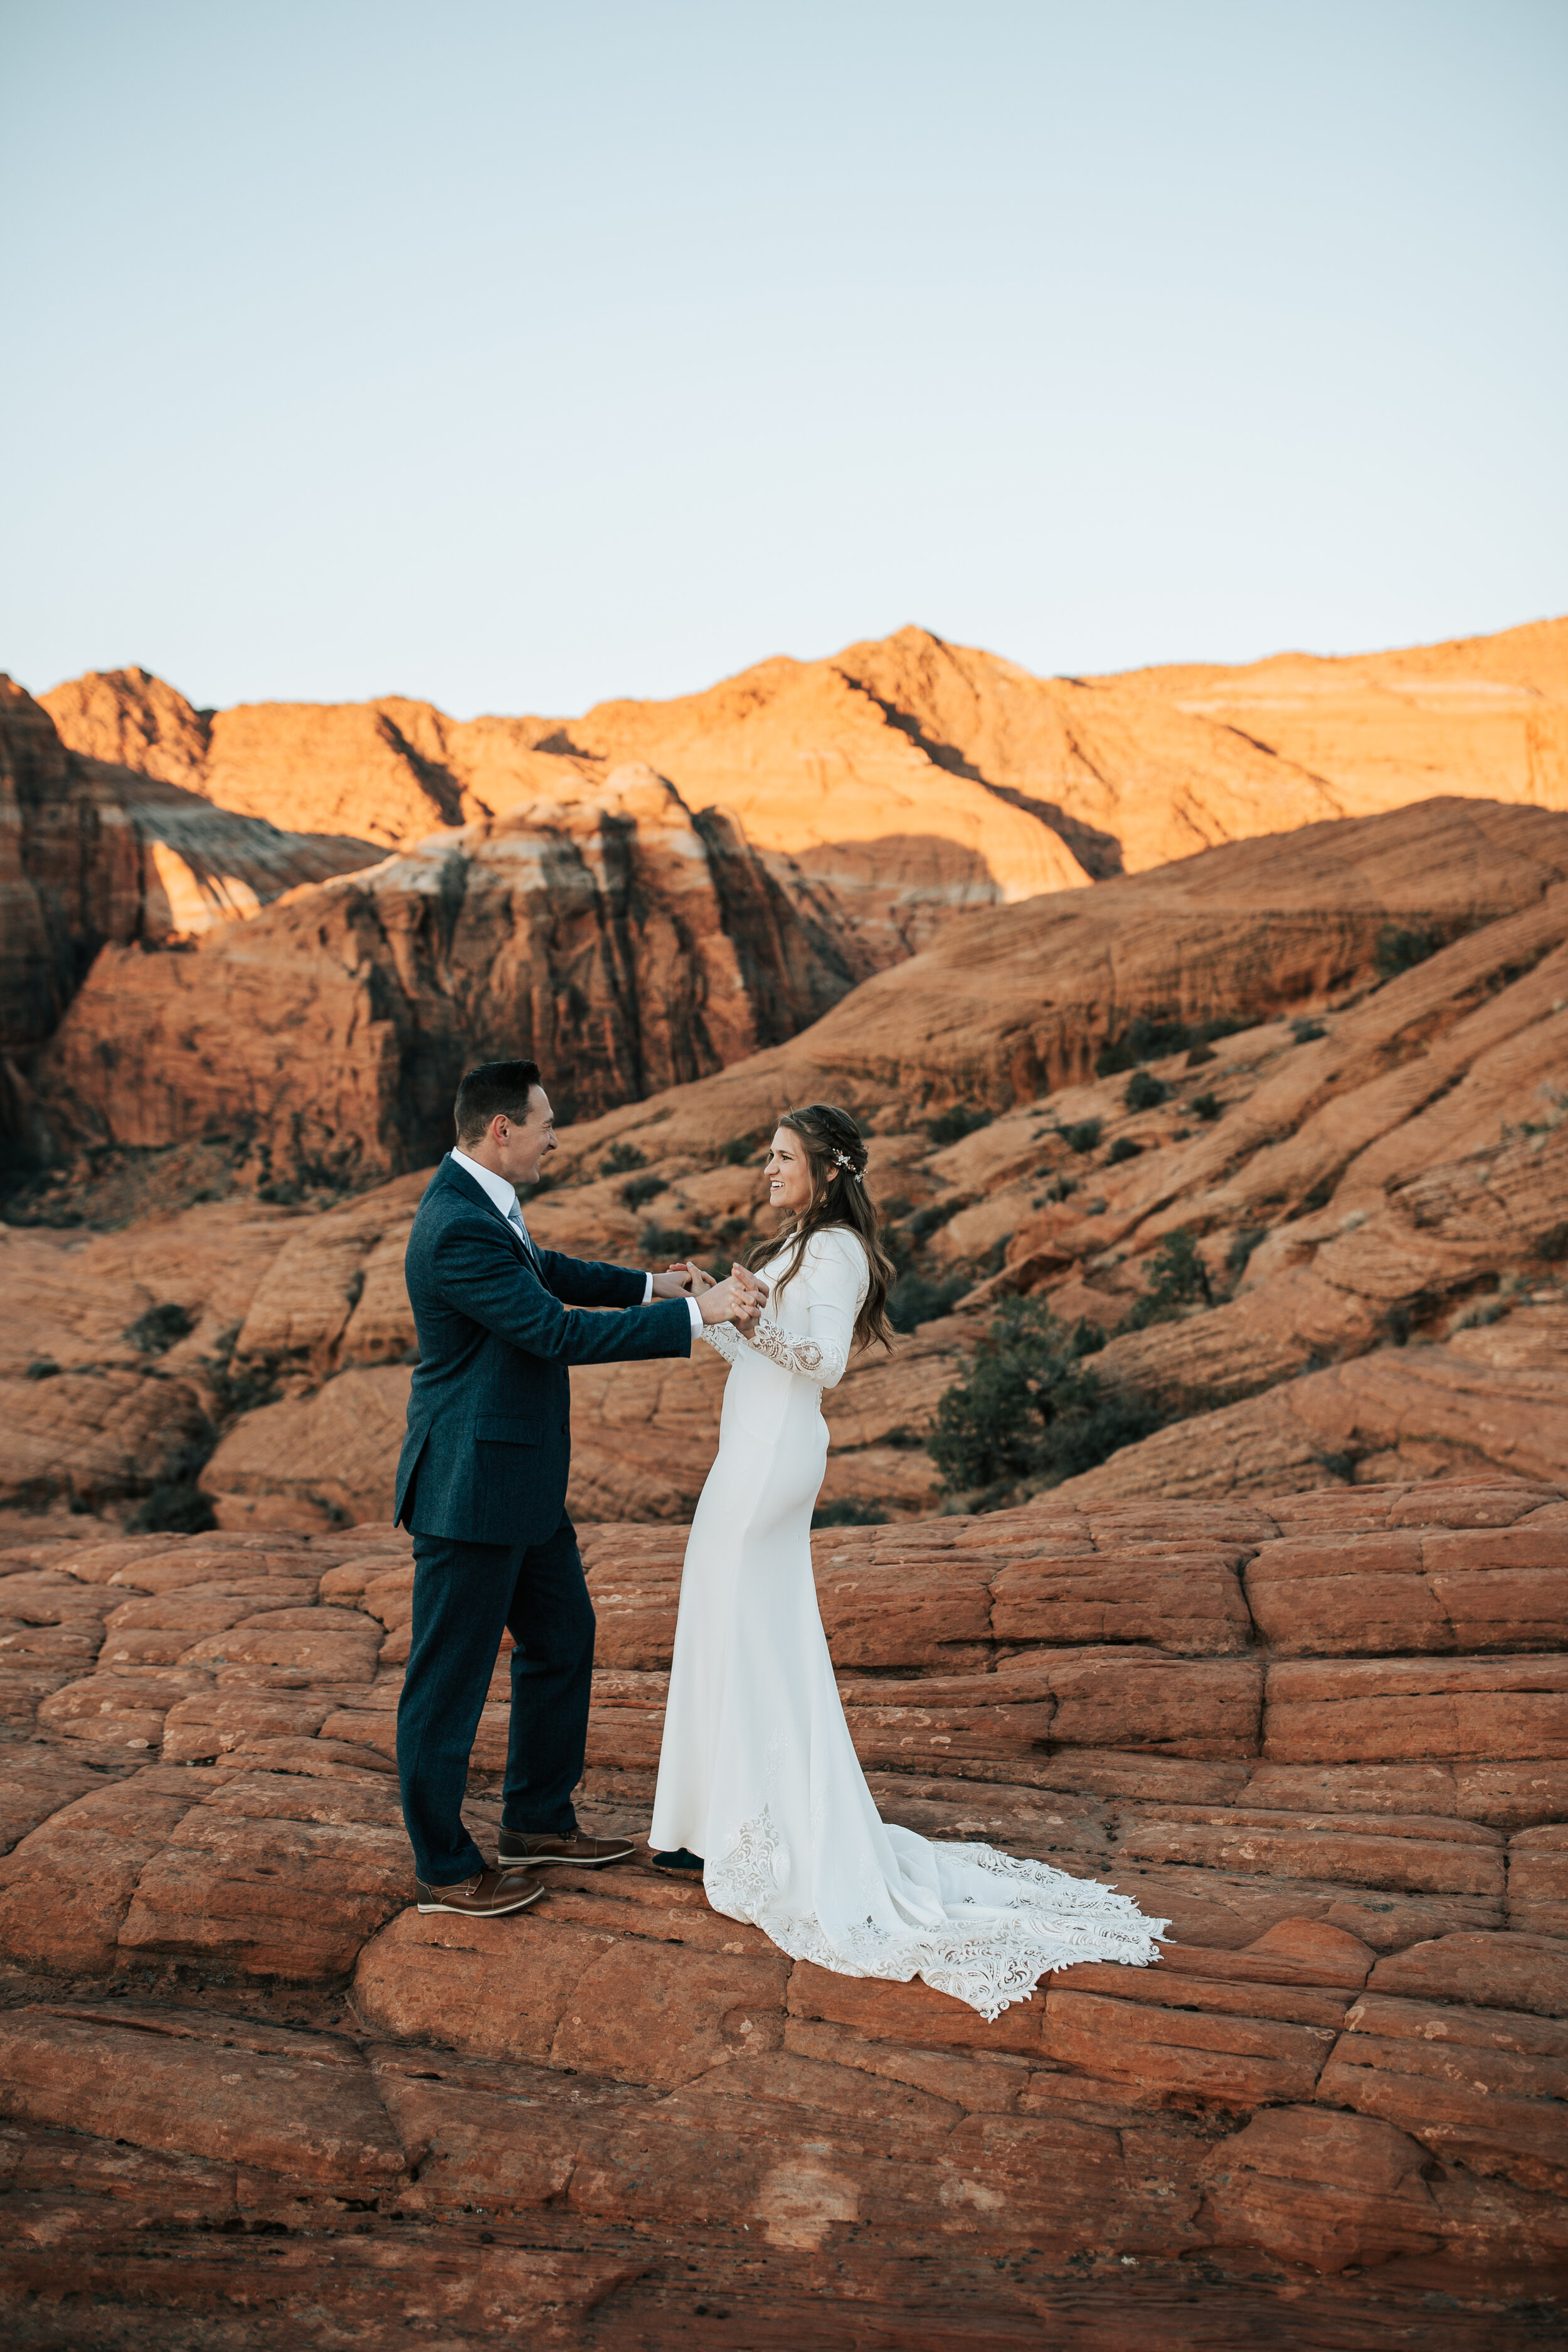  Husband and wife dance in wedding dress and suit on top of the red rocks in Southern Utah during an elopement with Emily Jenkins Photography. southern Utah elopement locations dancing wedding pictures elopement style #emilyjenkinsphotography #emilyj